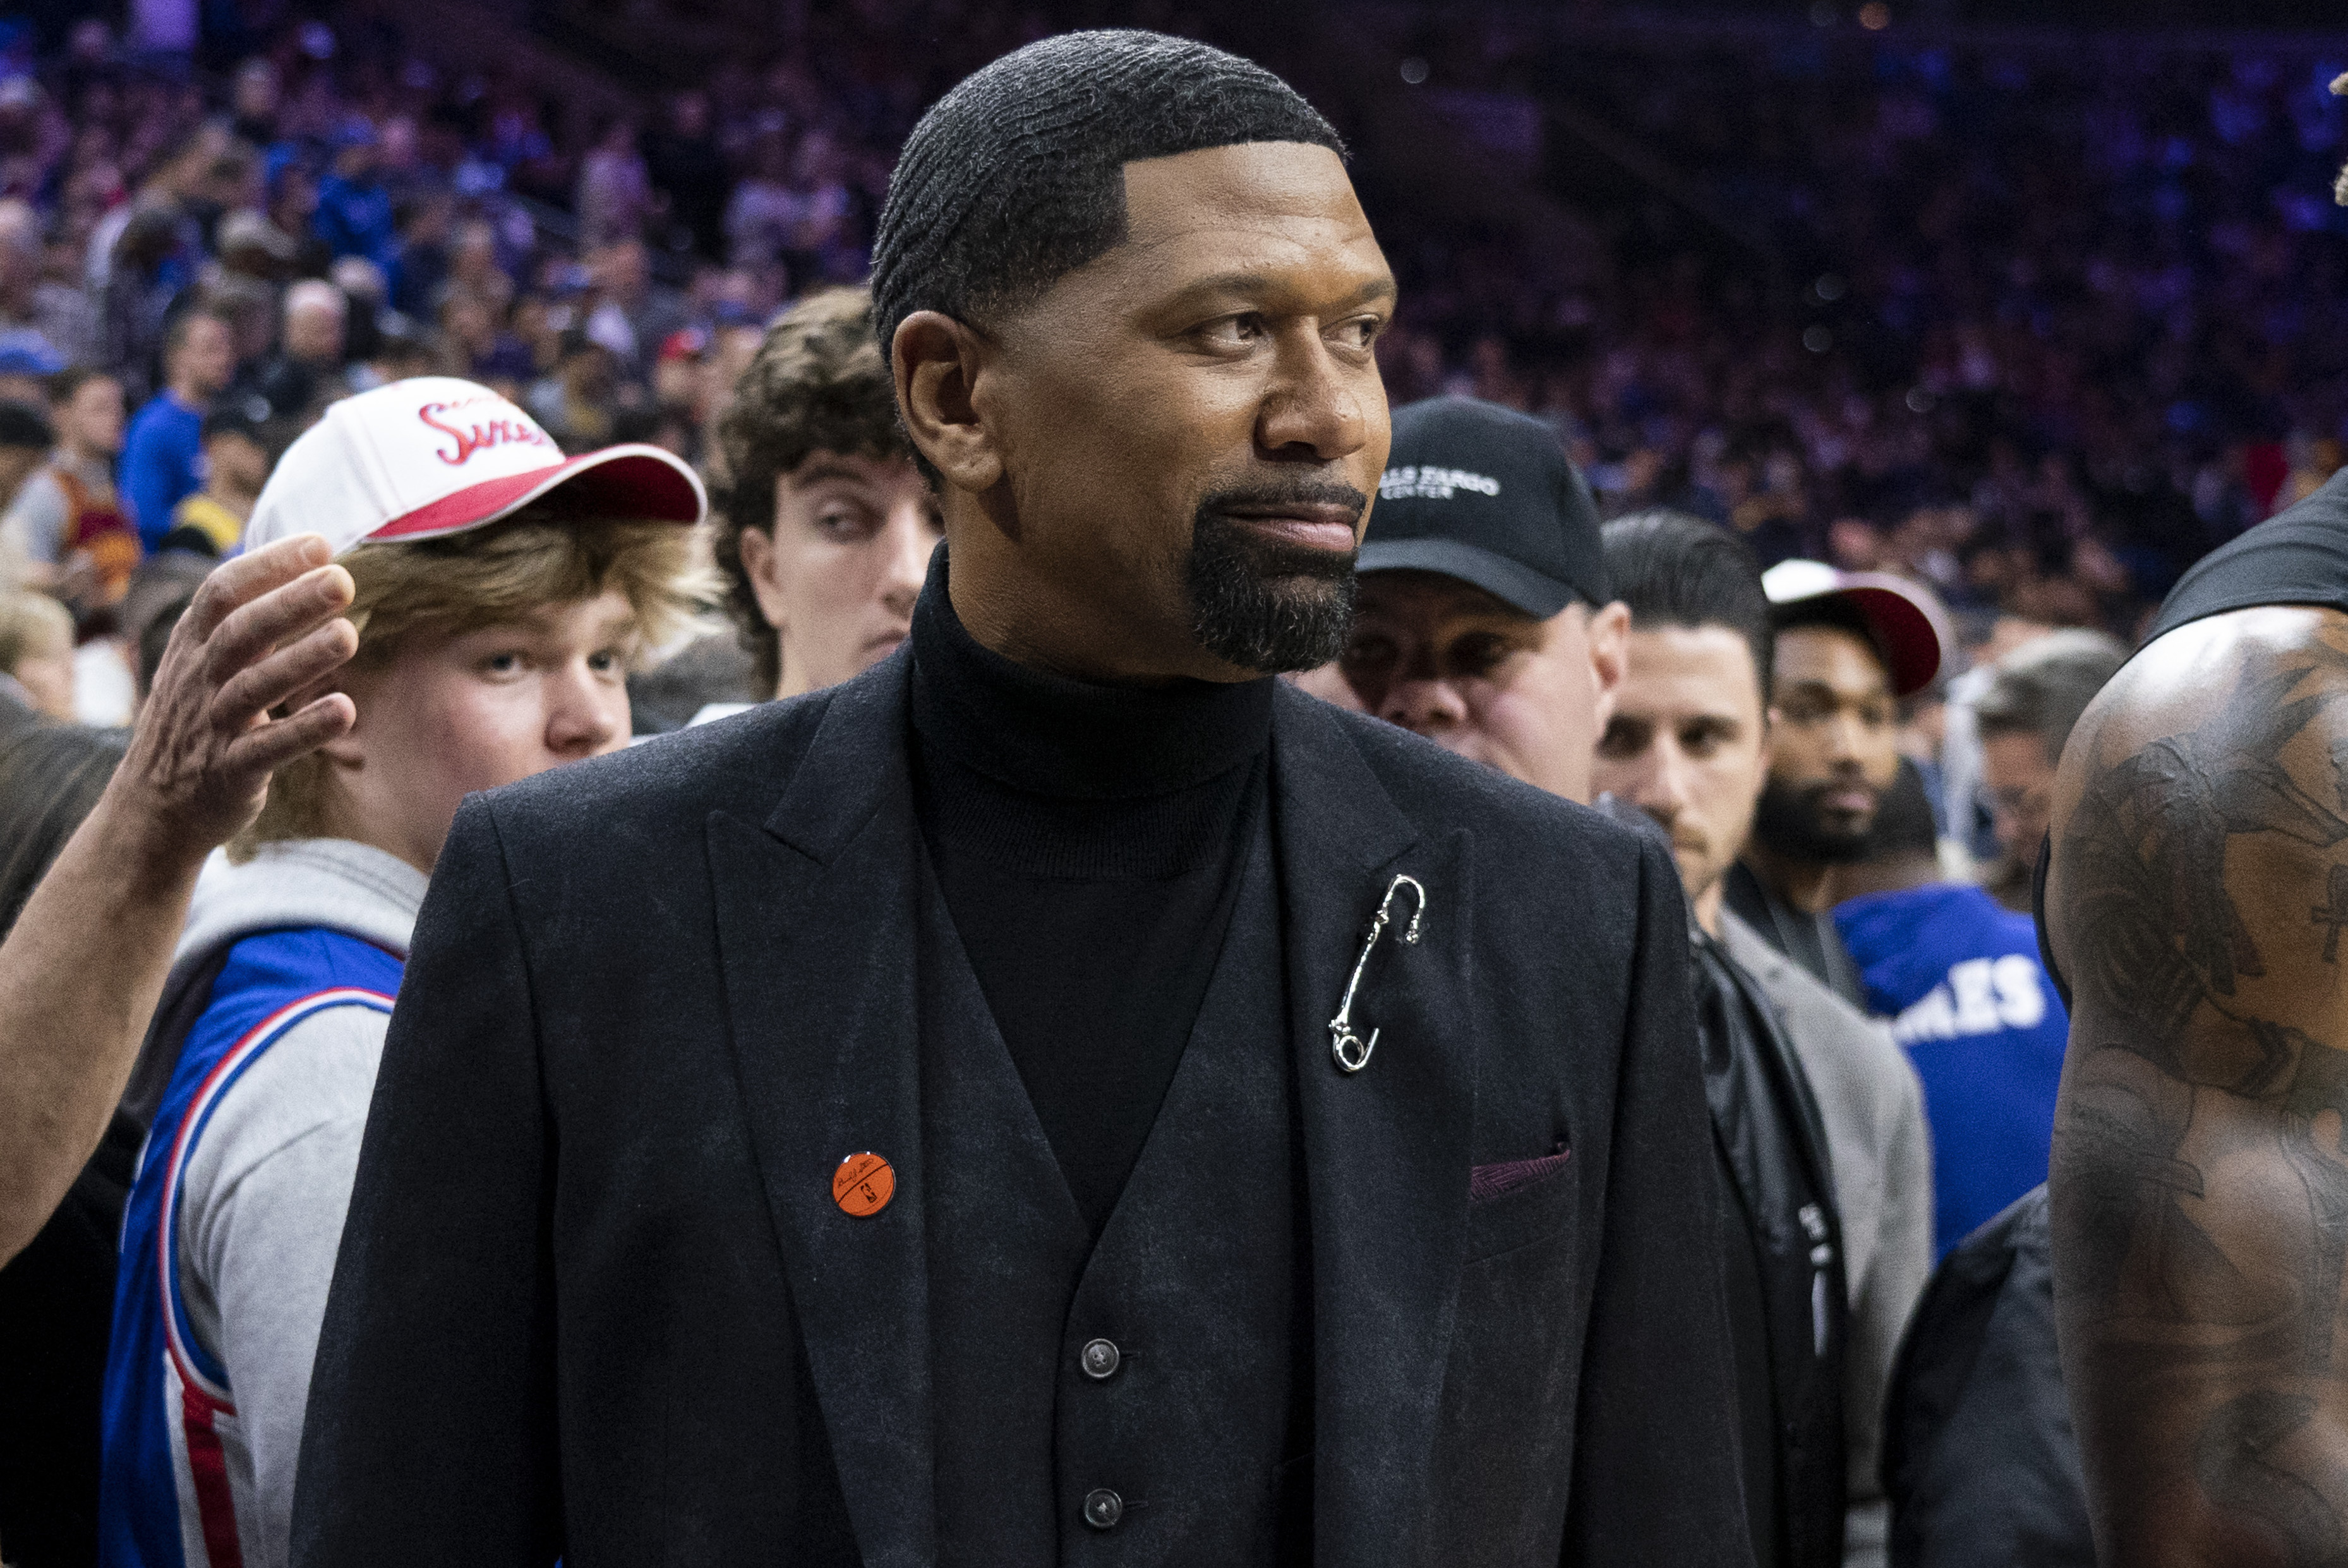 Jalen Rose Apologizes After Saying Kevin Love Made USA Olympic Team Due to 'Toke..